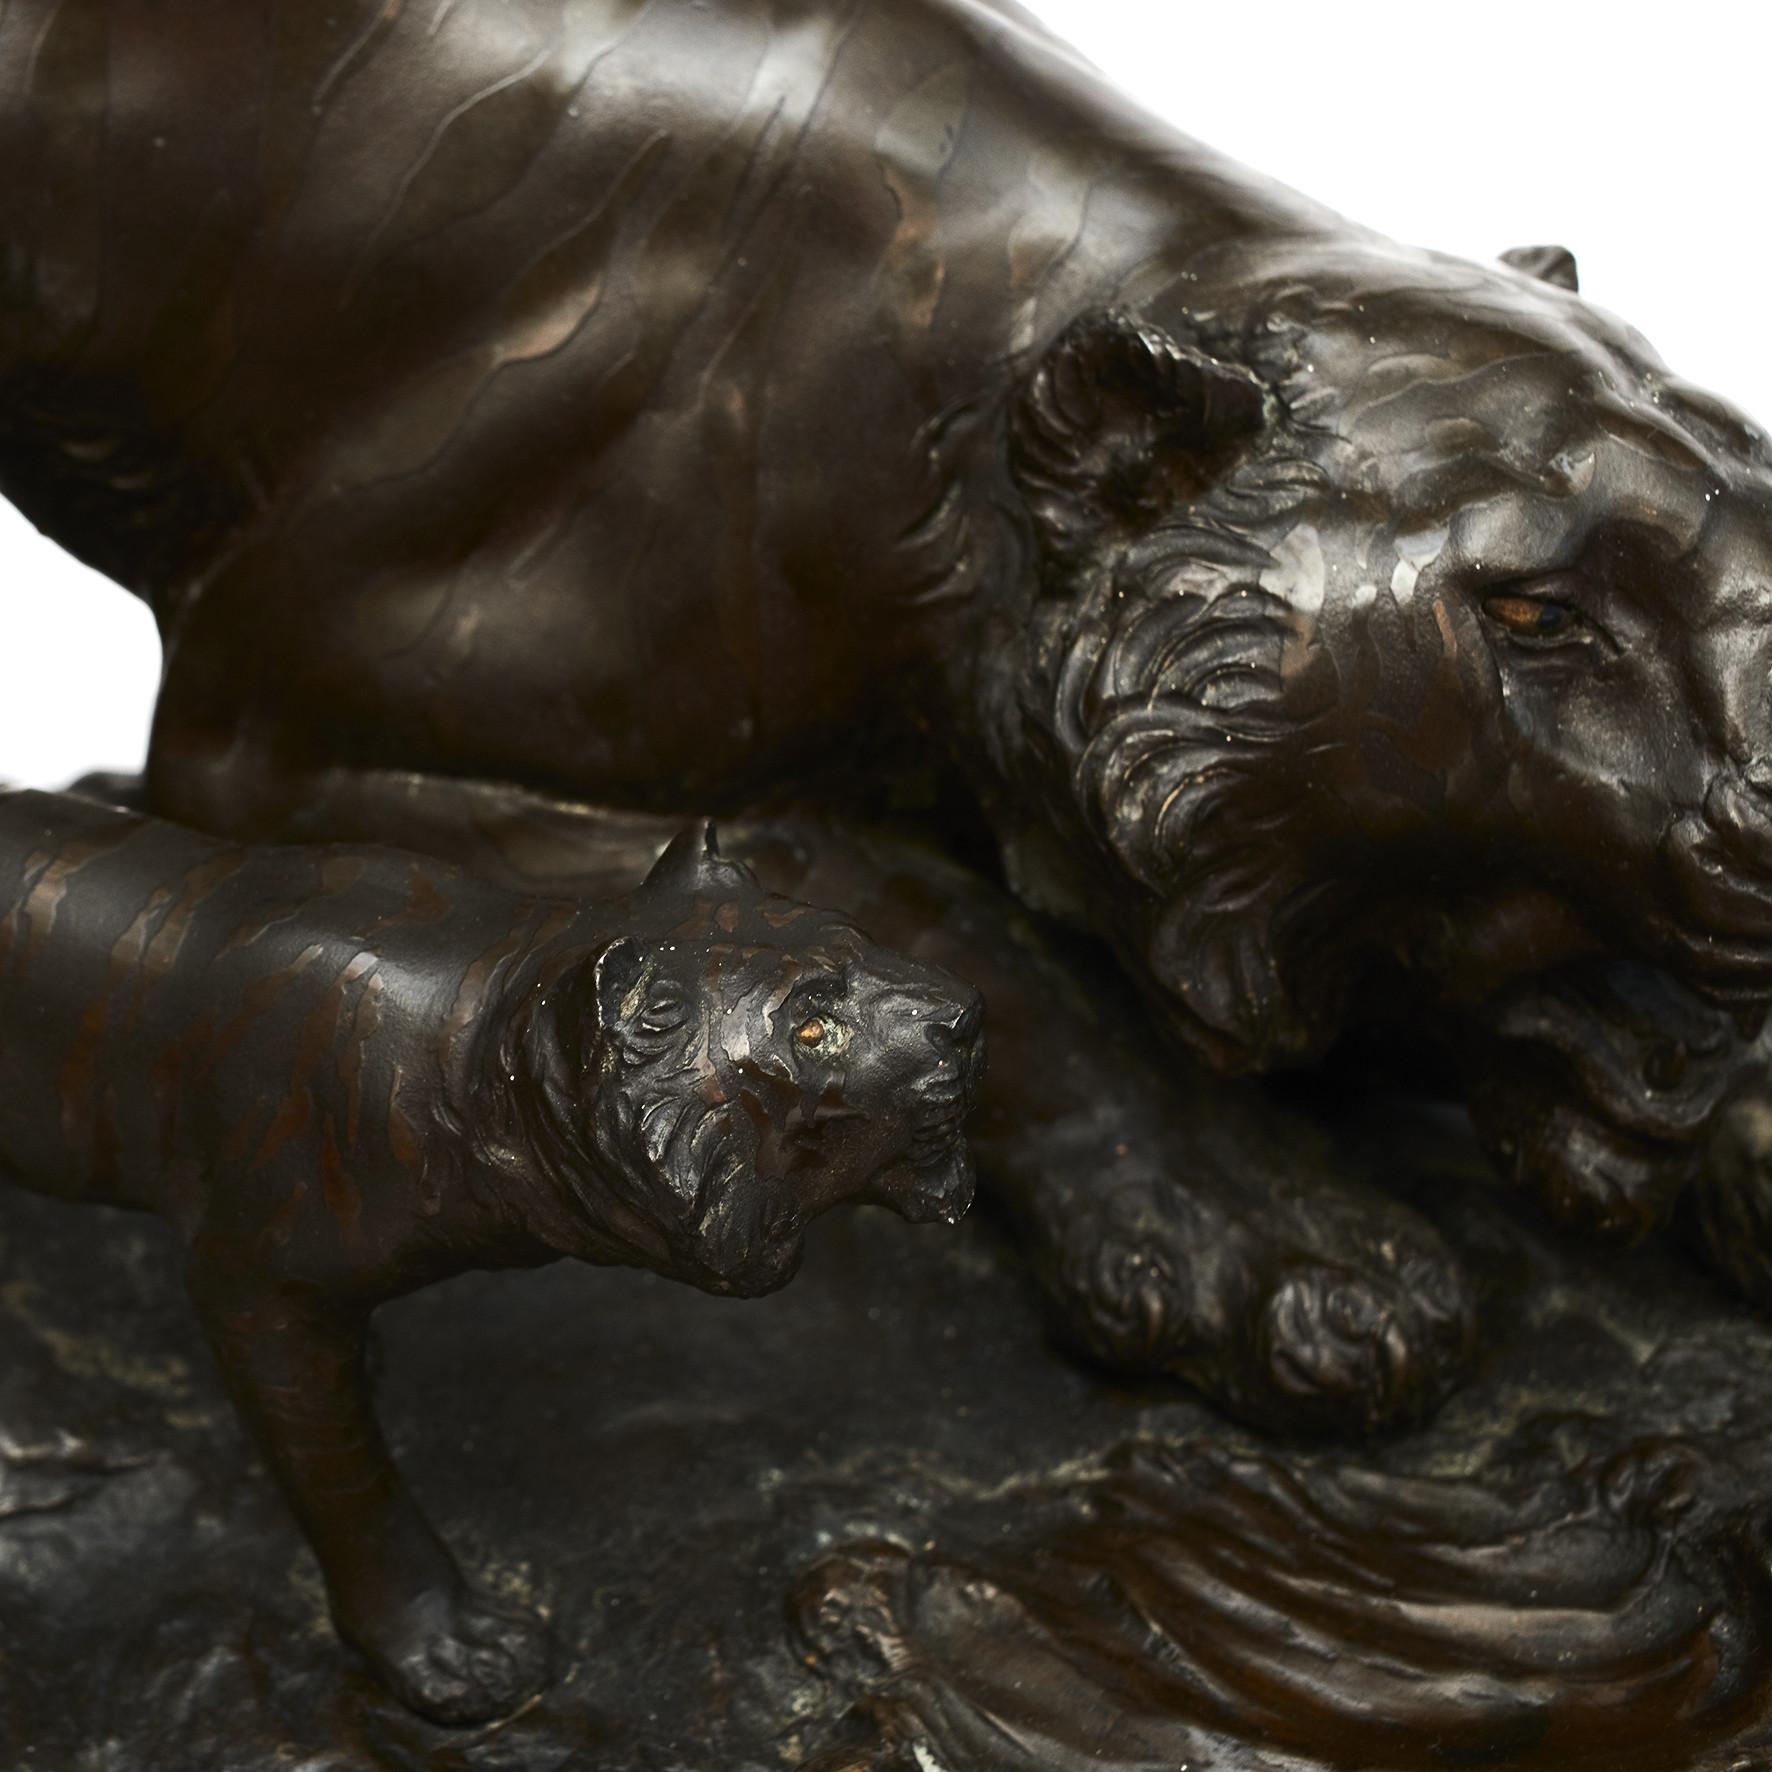 Japanese Meiji period (1868-1912) patinated bronze sculpture of a tiger with cub.
Mounted on a carved hardwood base decorated with foliage.
High quality with many fine details.
Signed with stamp.

Measures are incl. wood base.